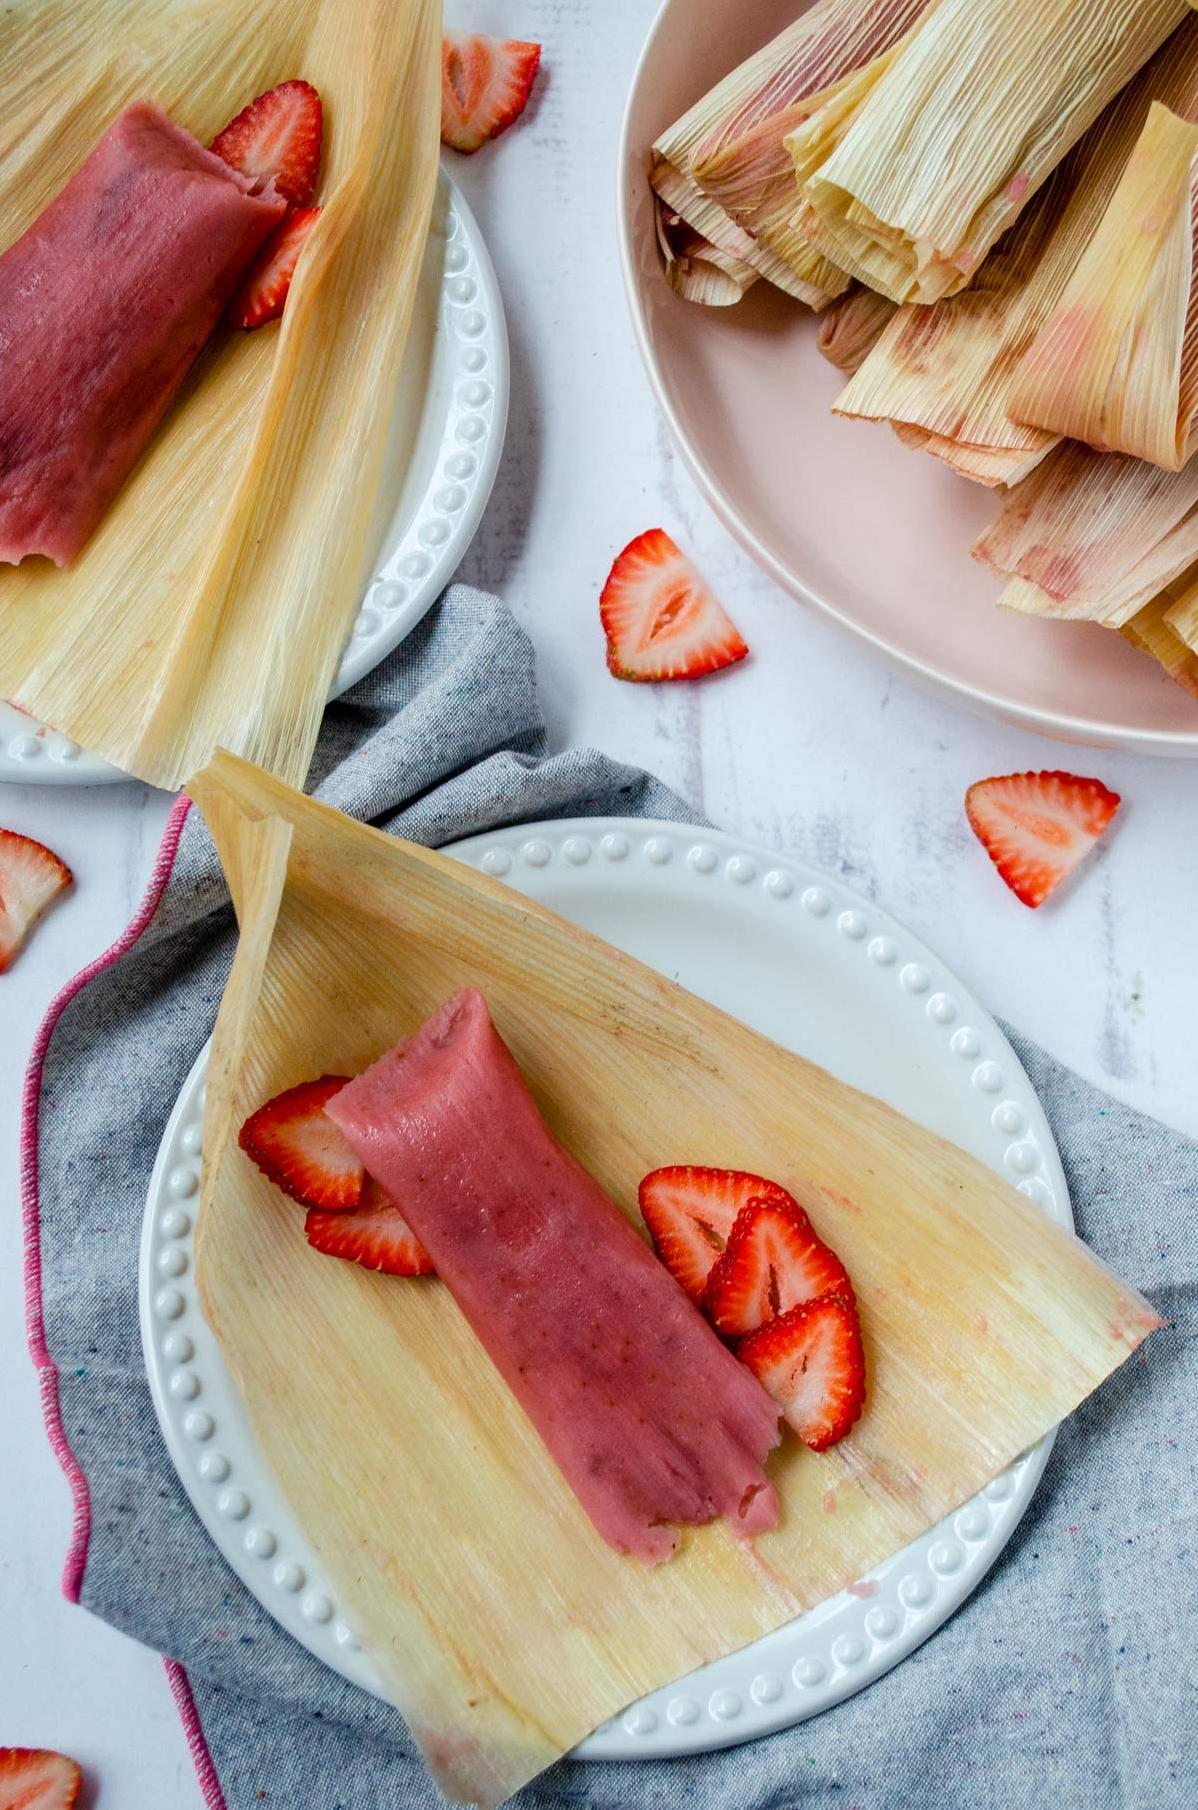  Who said tamales can't be dessert? These Tamales De Fresa prove them wrong! 🍰